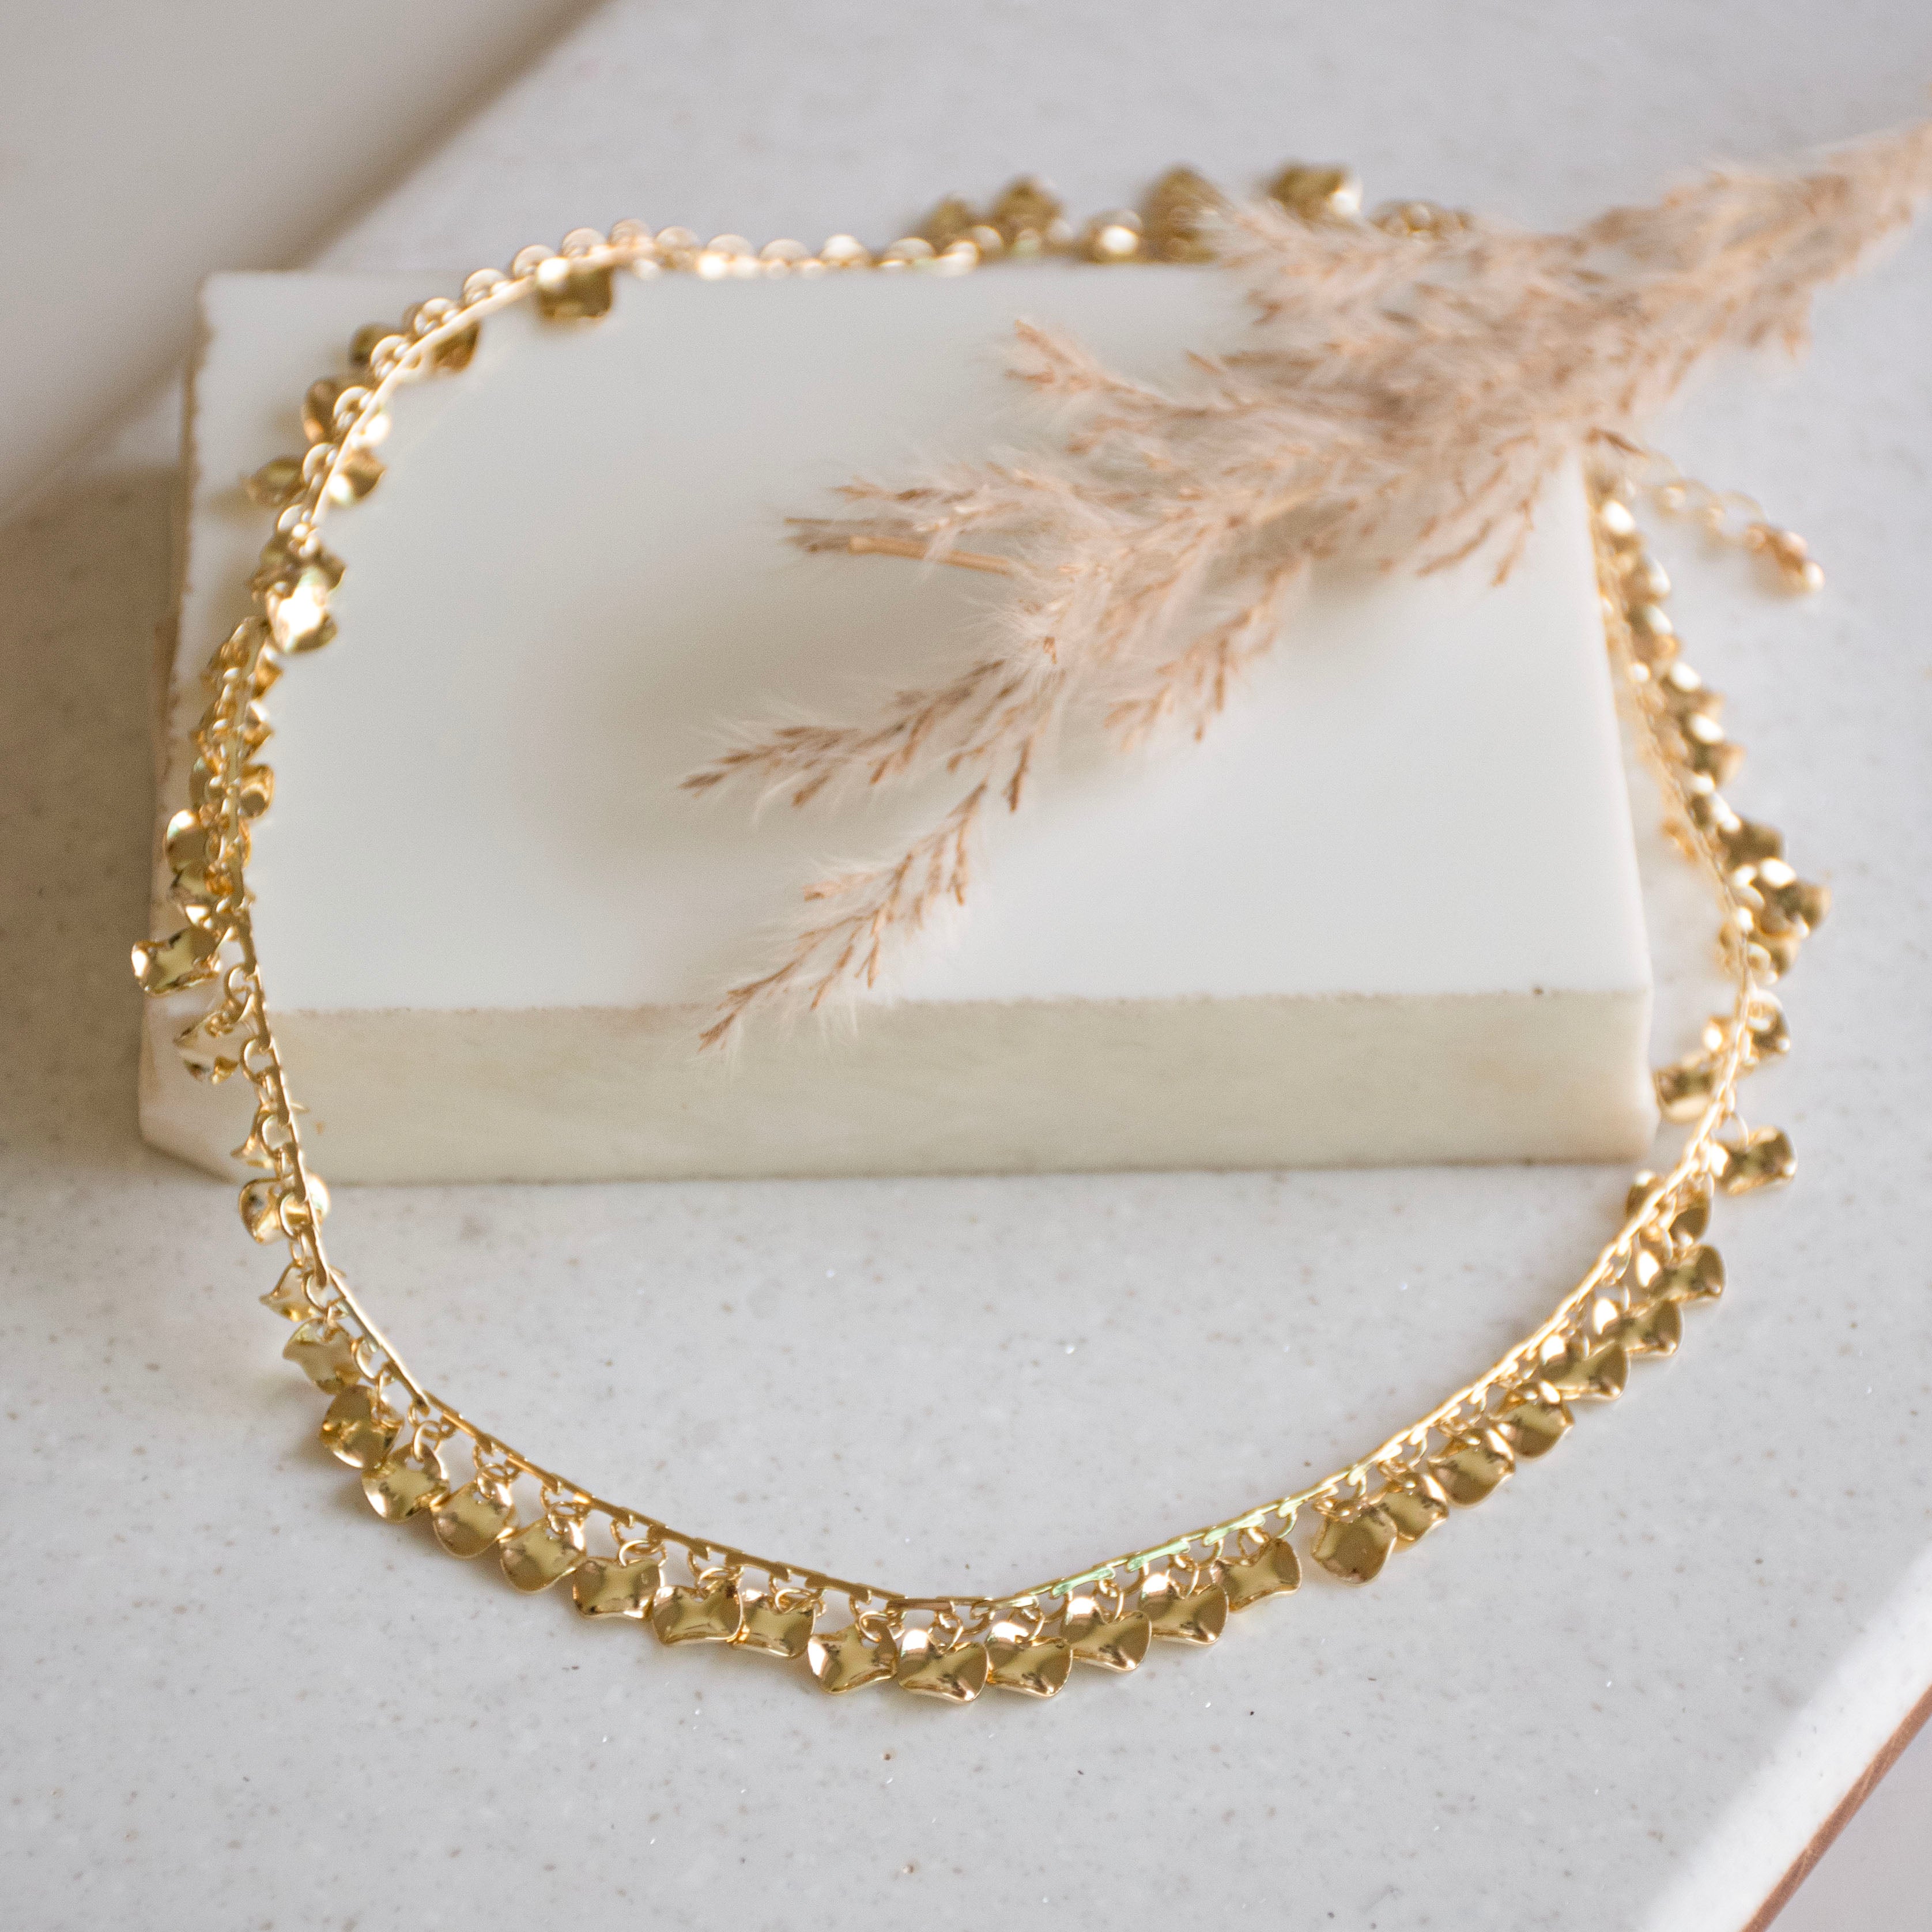 Gilded Jingle Chic Necklace